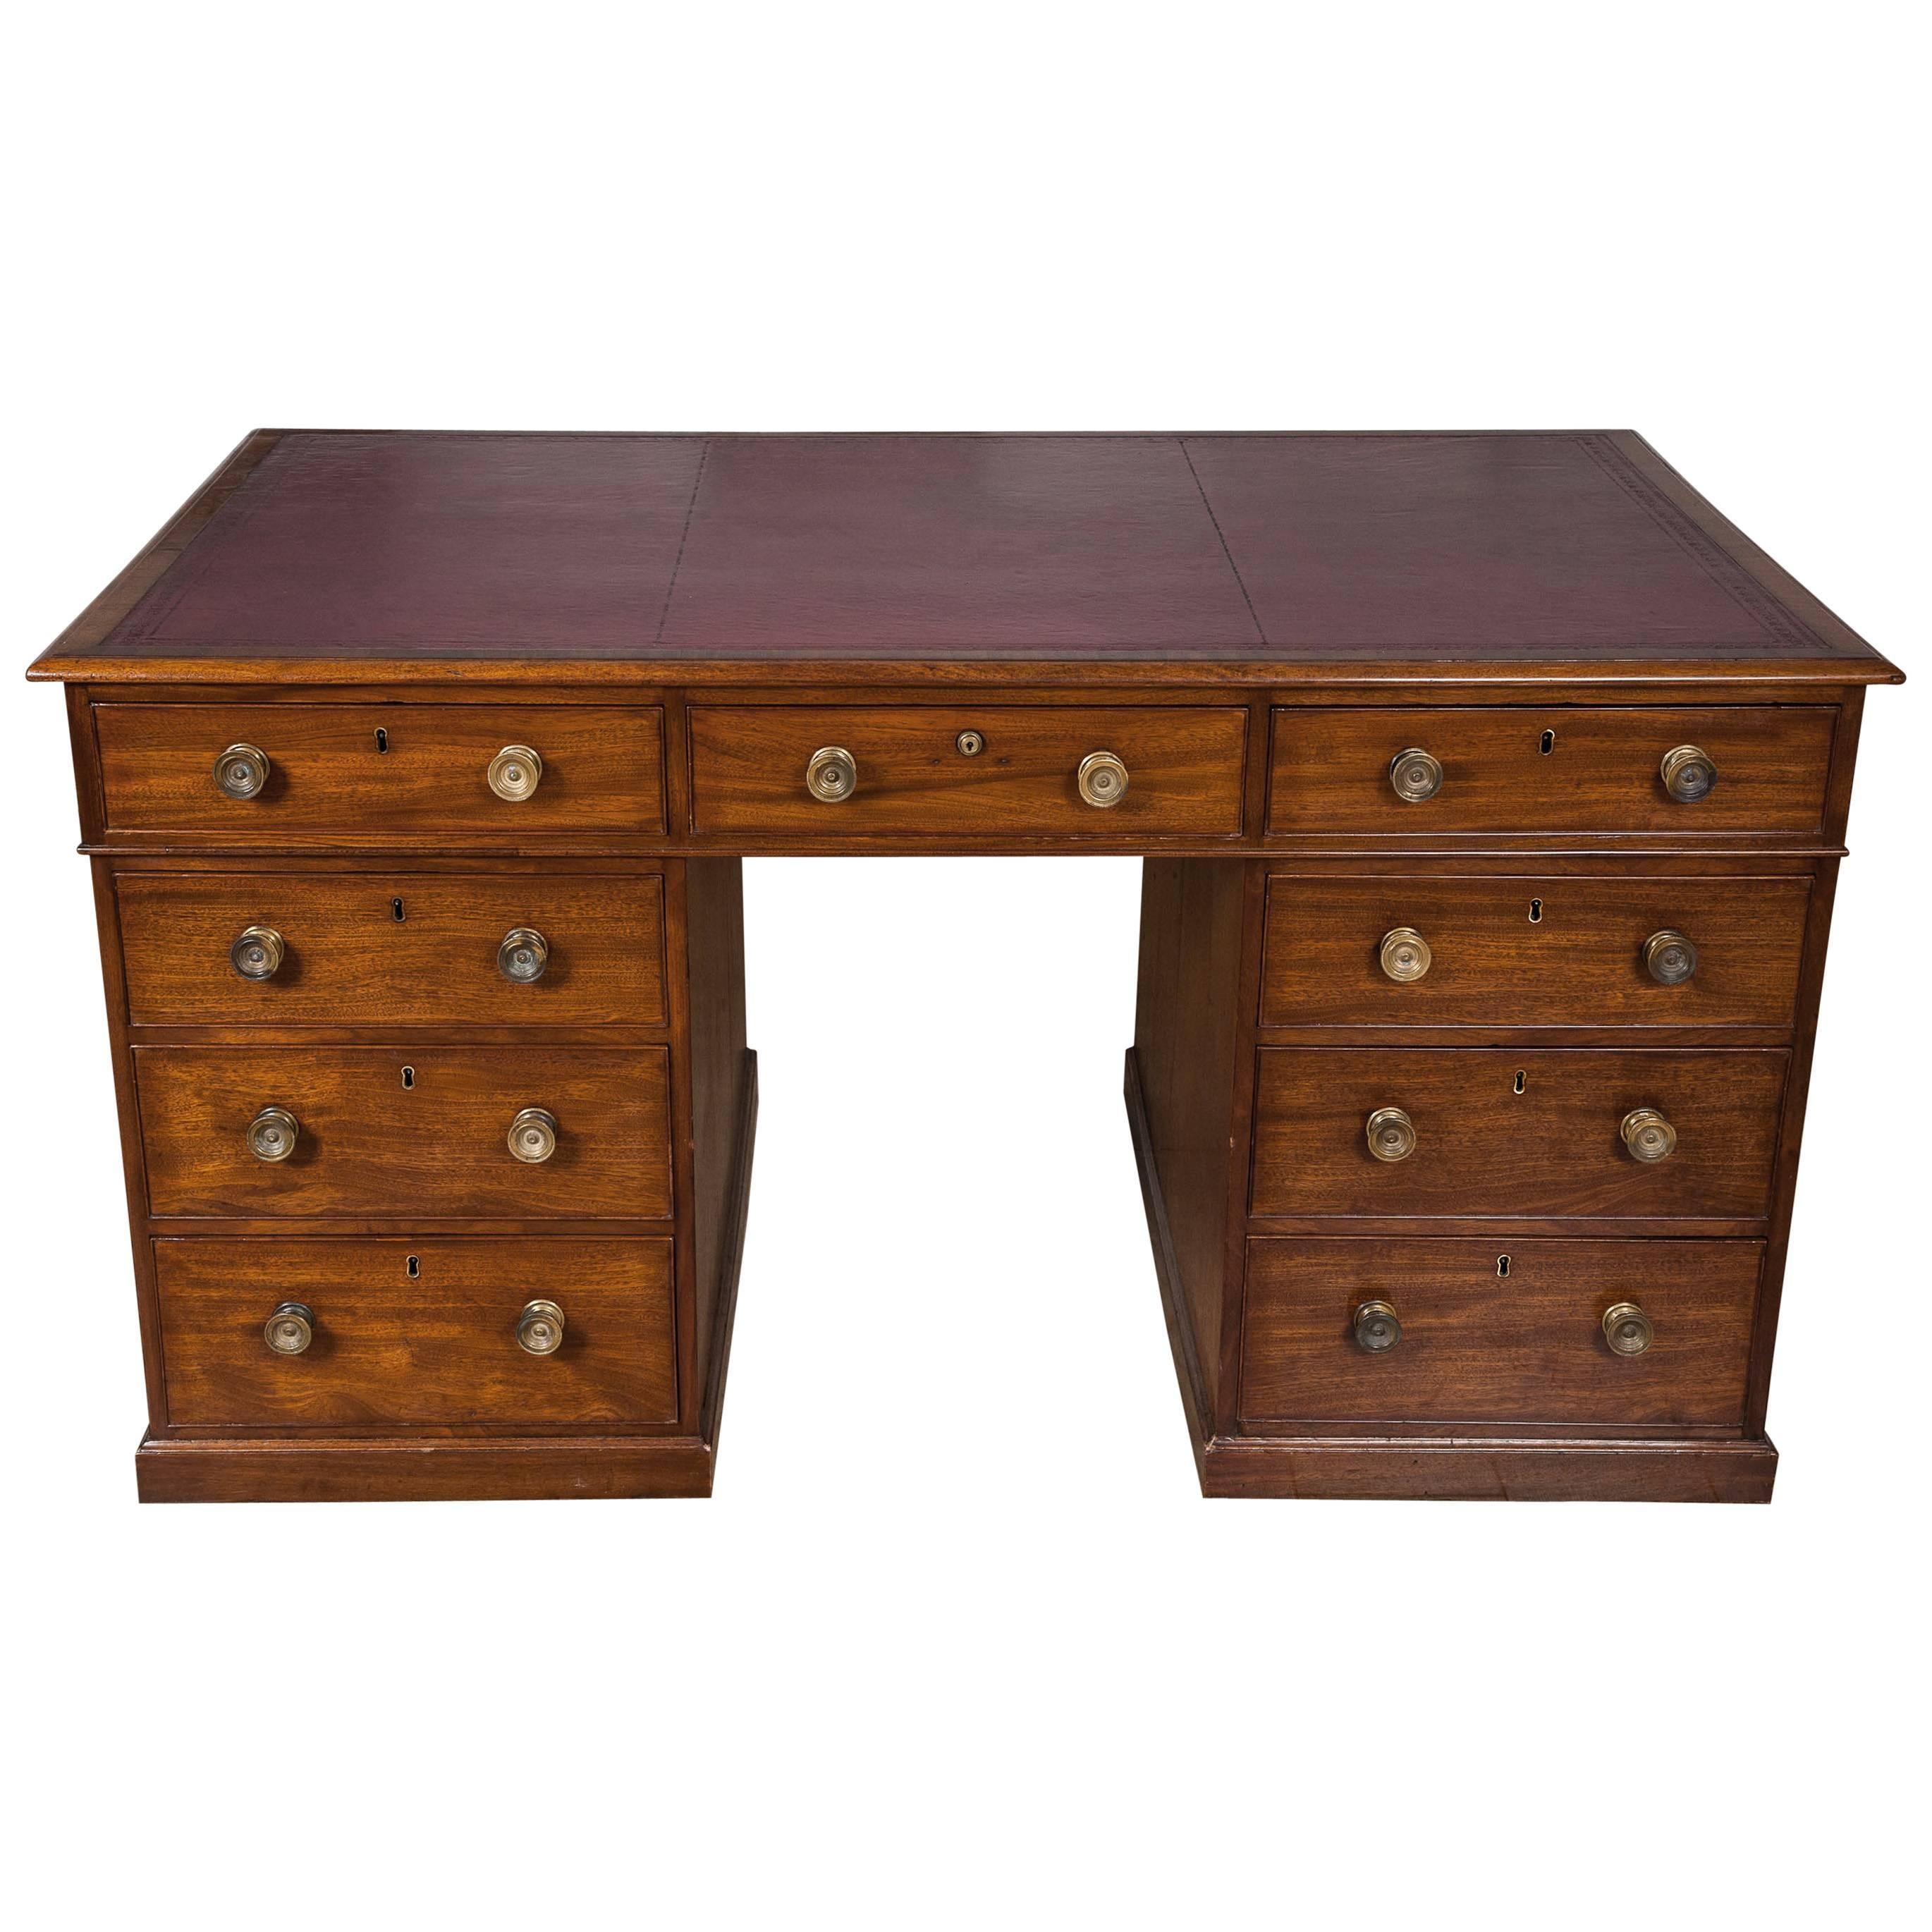 Regency Period Early 19th century Mahogany Partners Desk with drawers both sides For Sale